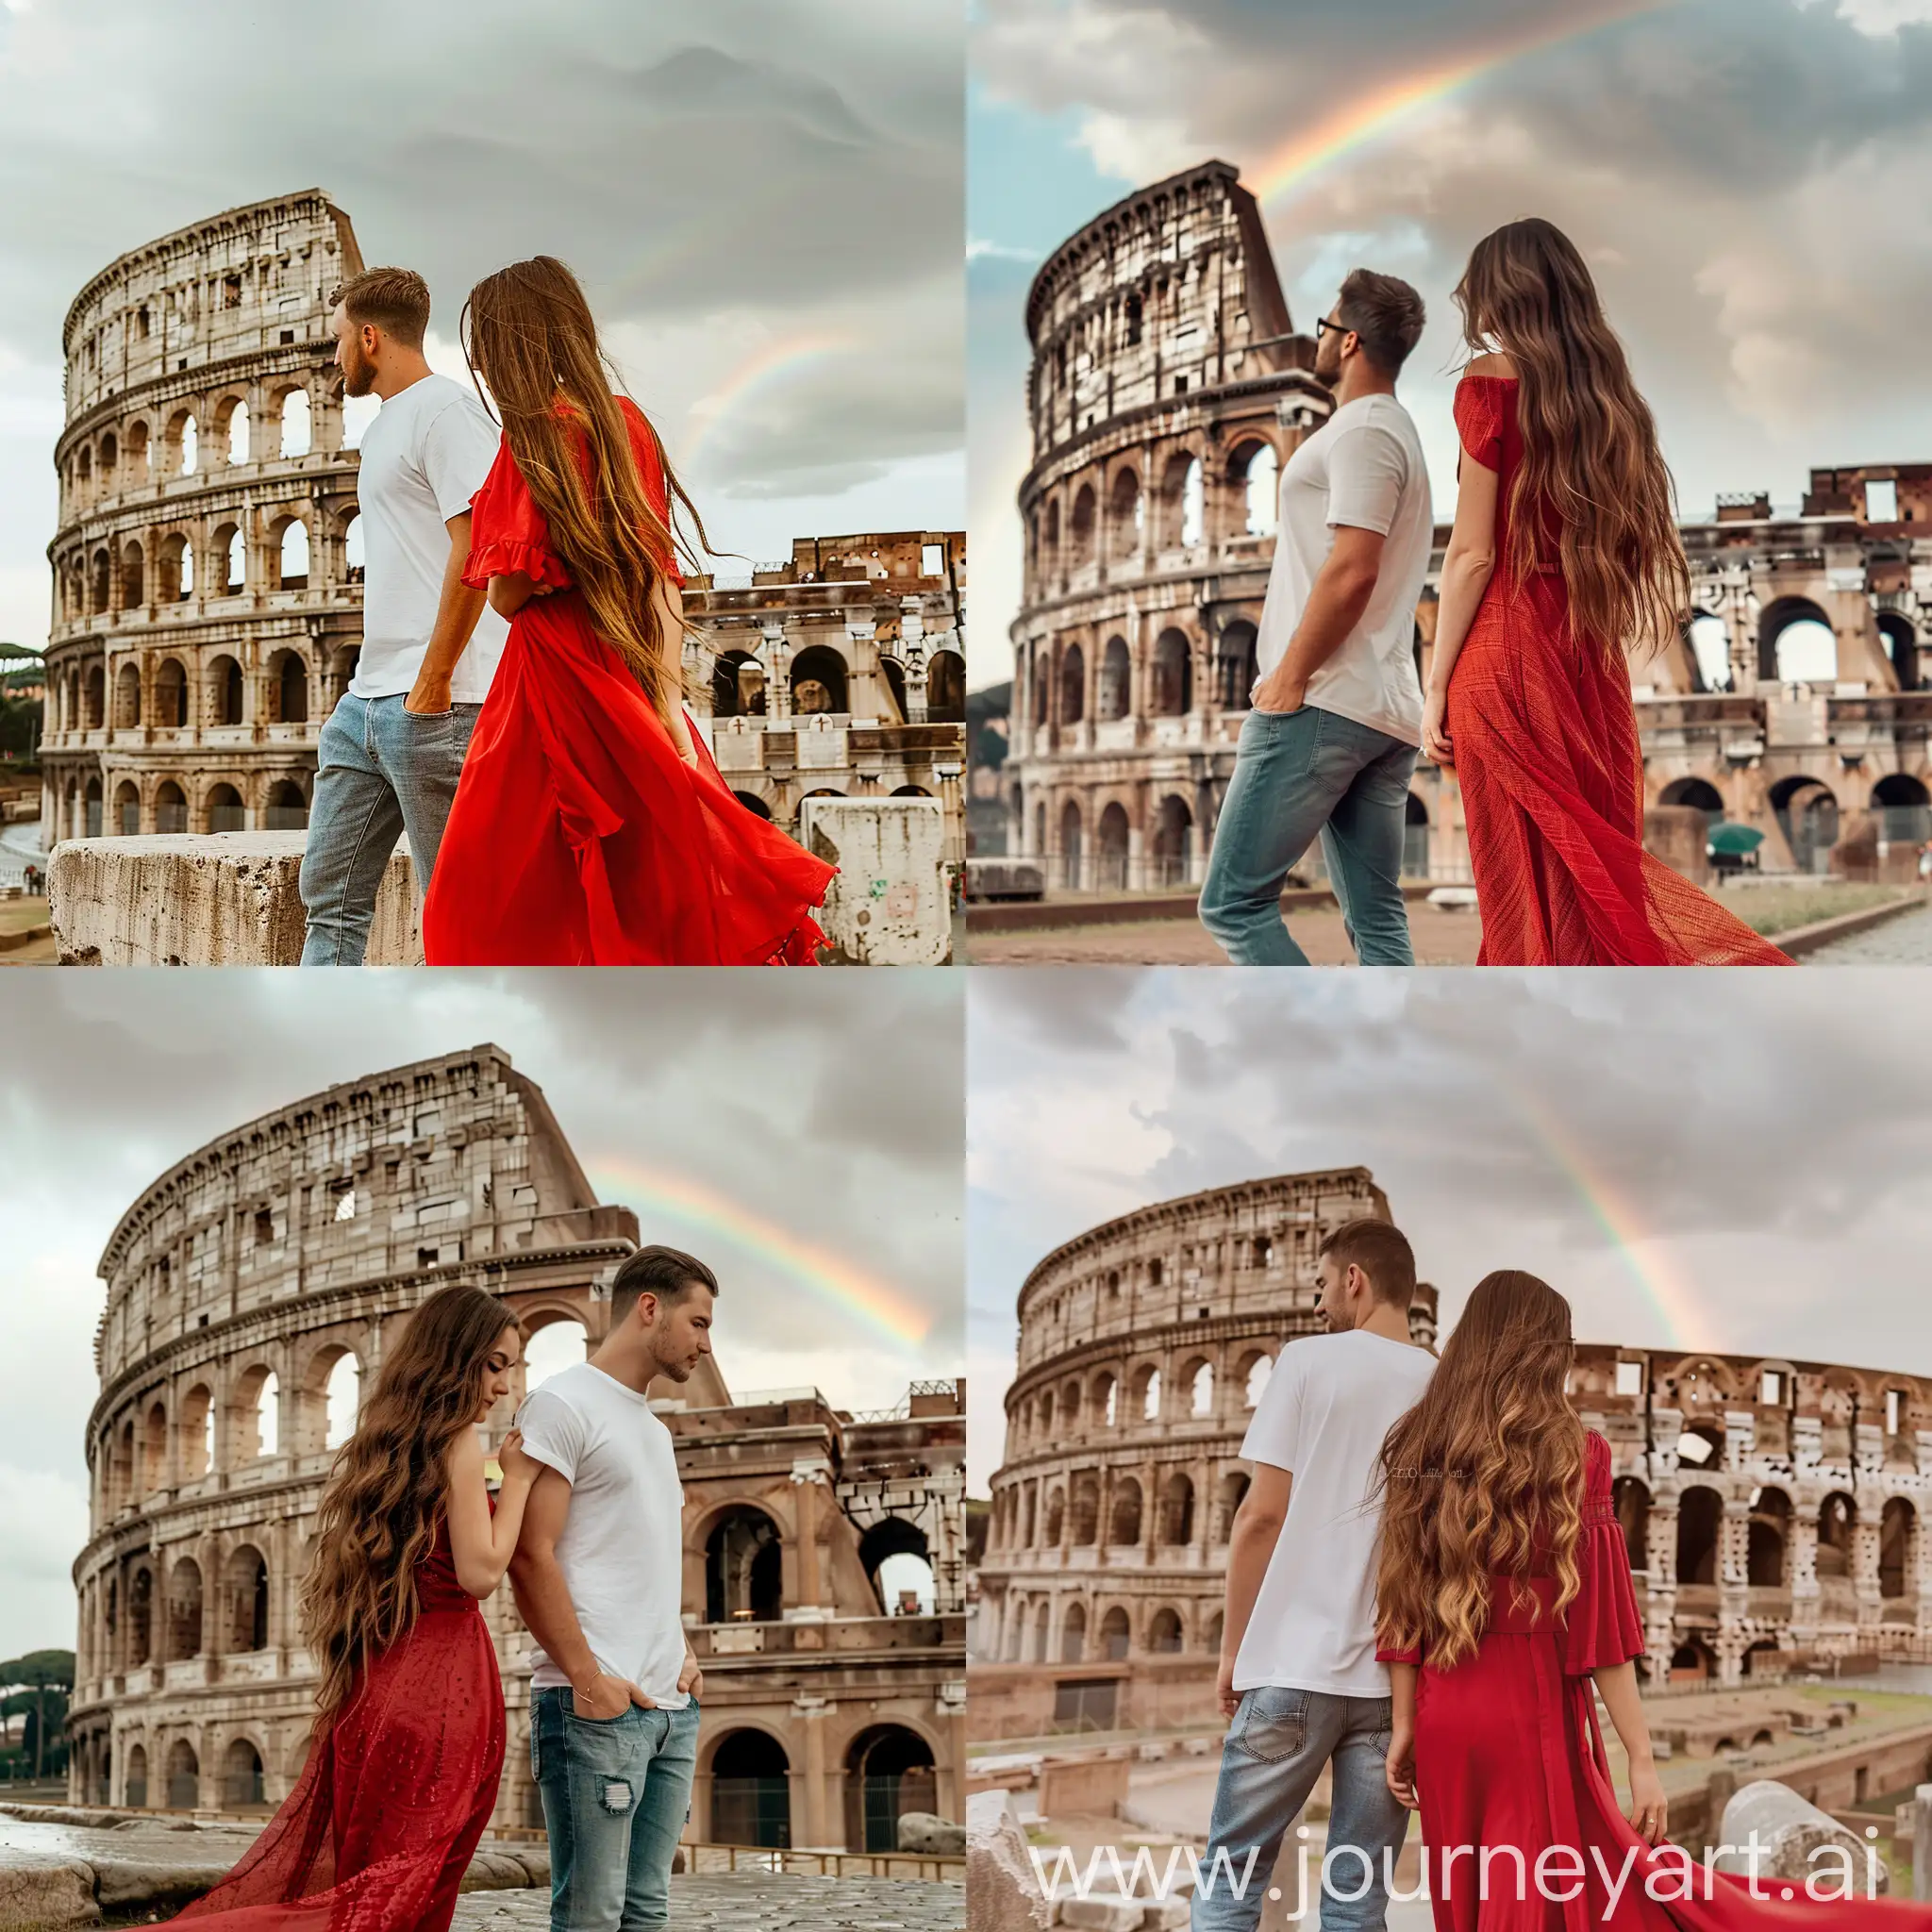 Romantic-Couple-in-Red-Dress-and-Jeans-at-Colosseum-with-Rainbow